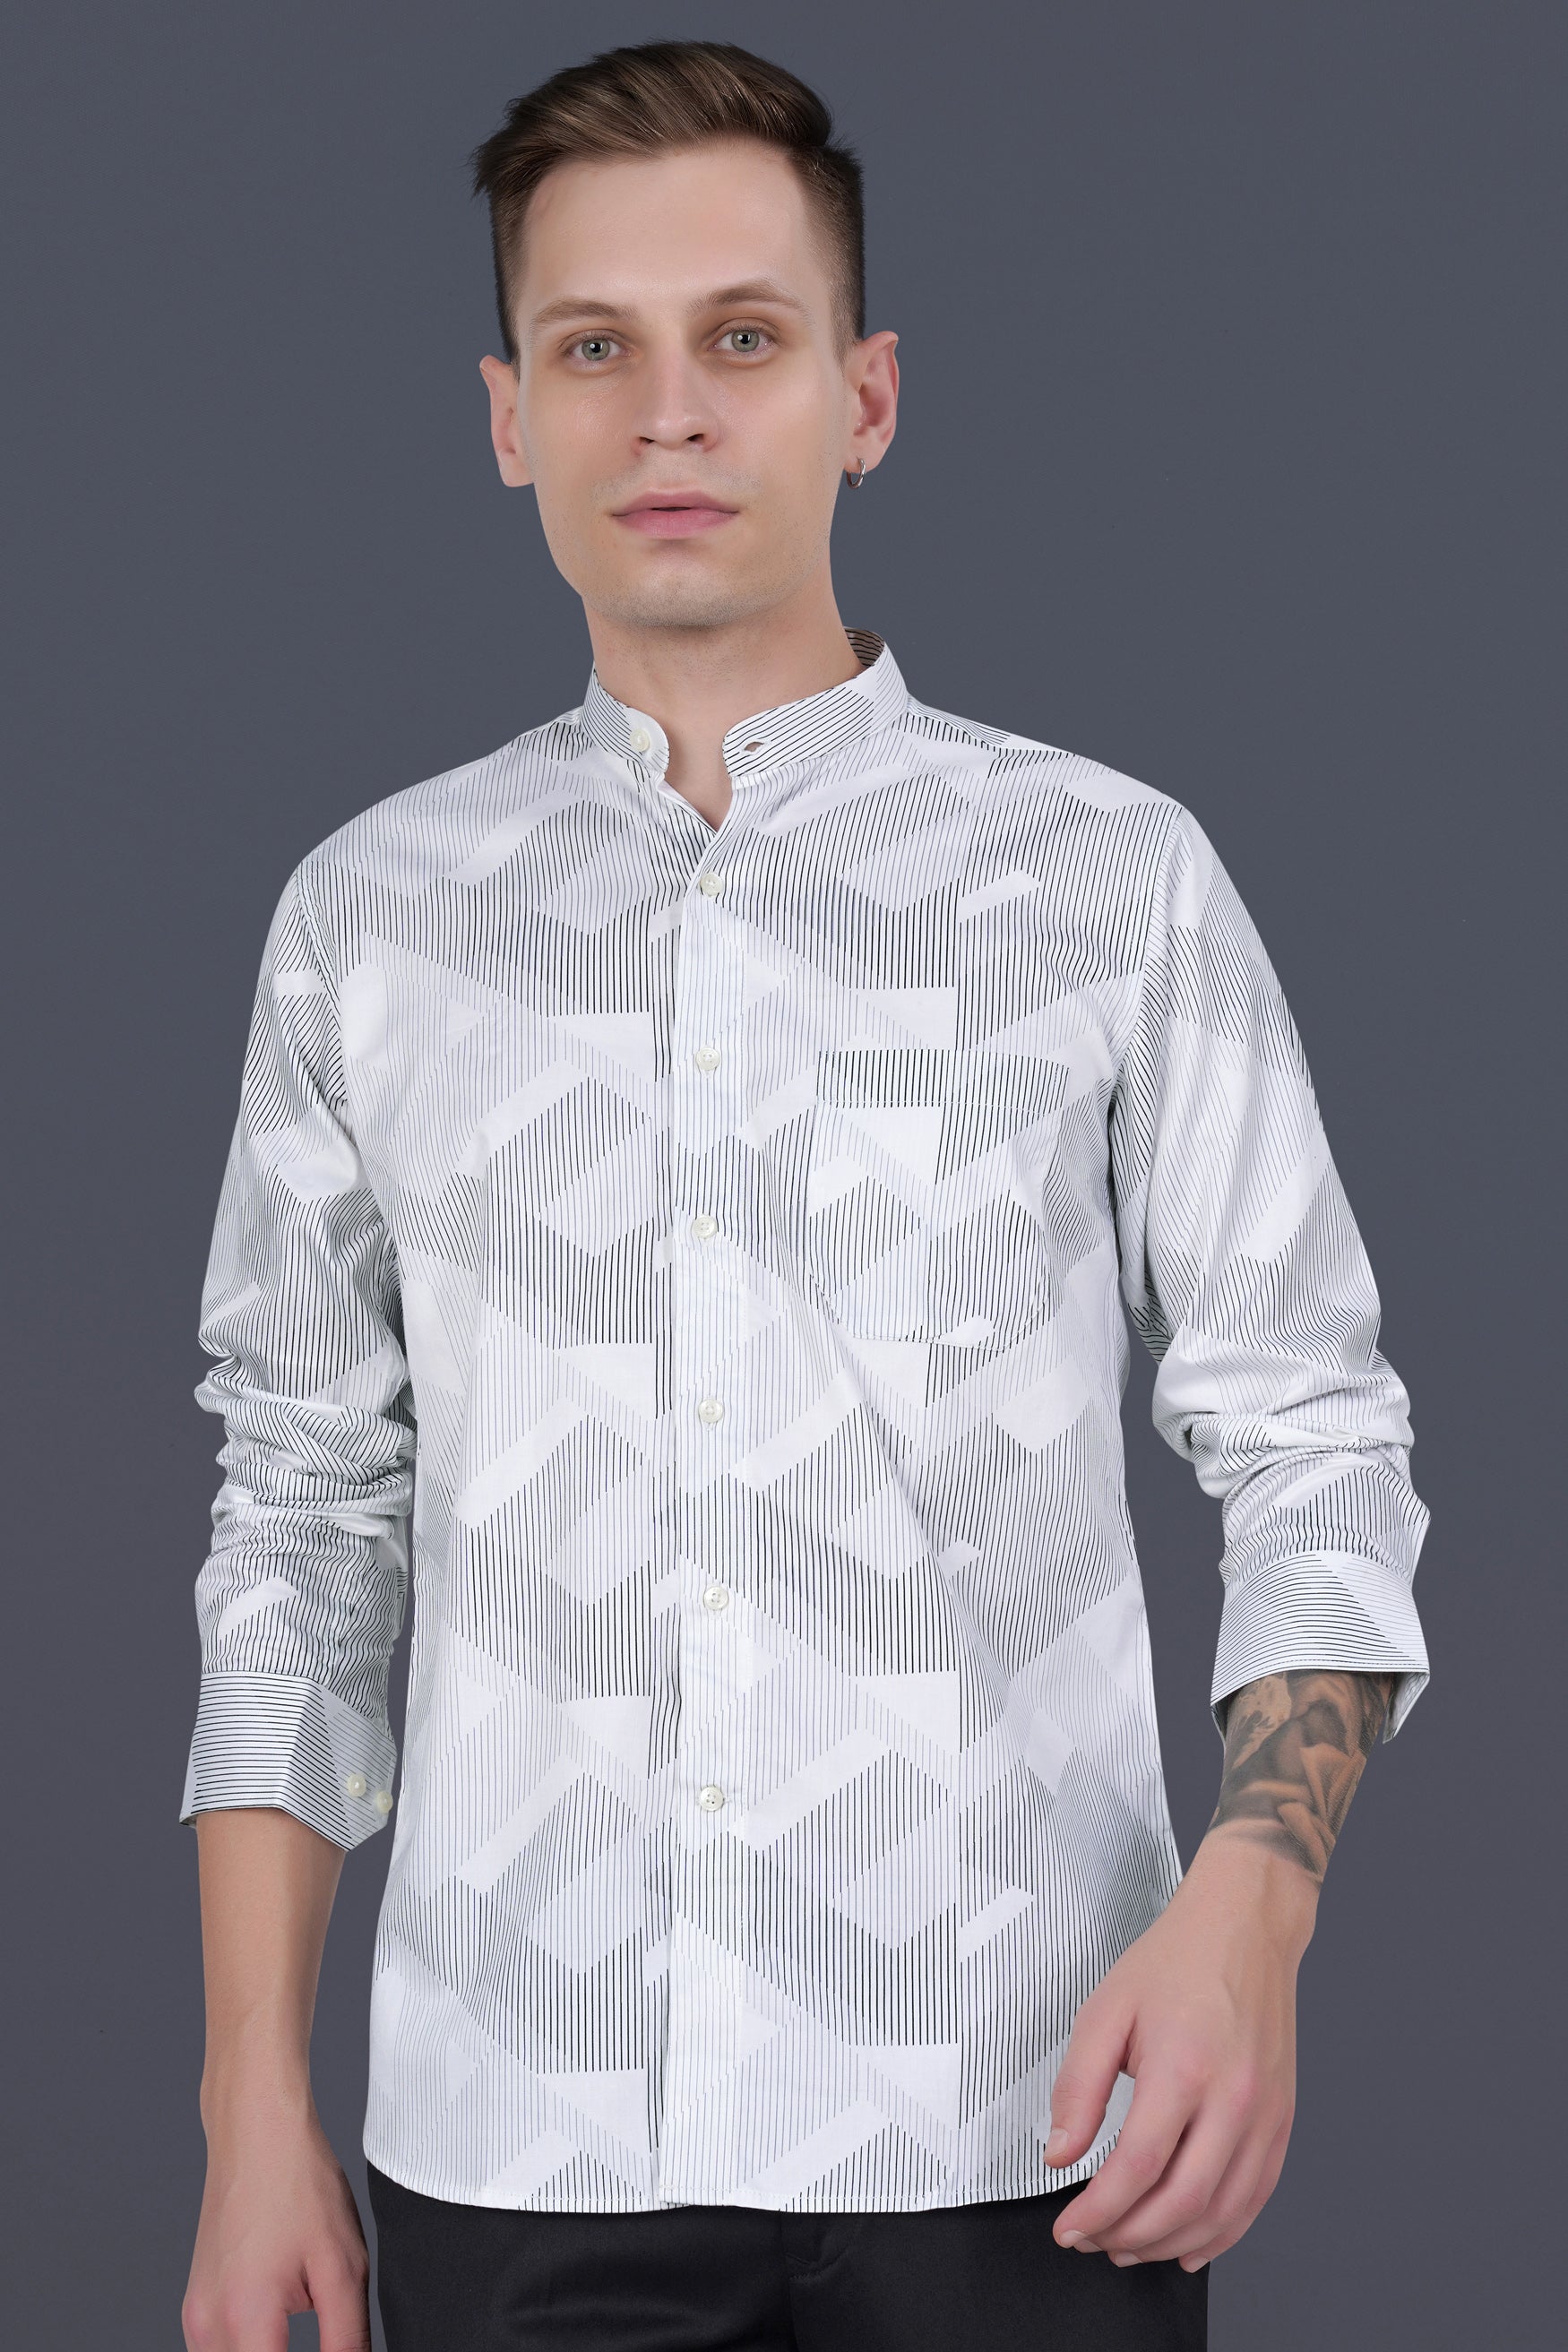 Bright White and Black Abstract Lines Printed Subtle Sheen Super Soft Premium Cotton Shirt